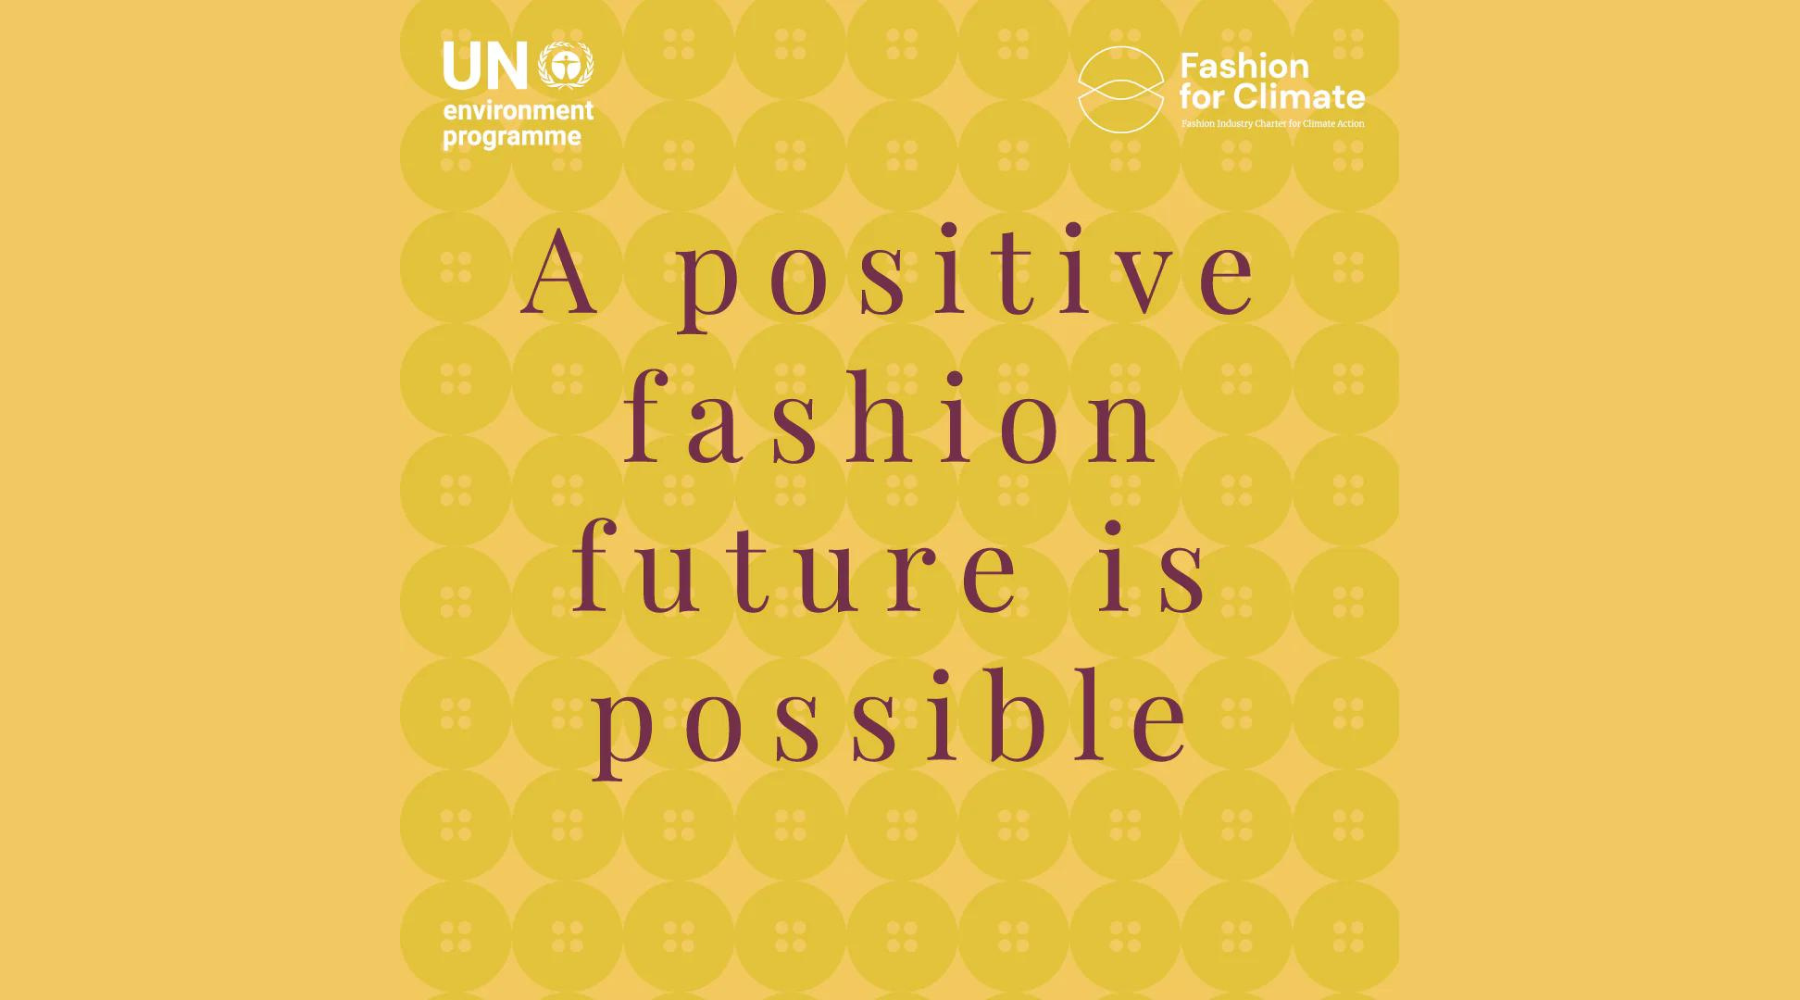 How can fashion achieve its 2030 climate goals?